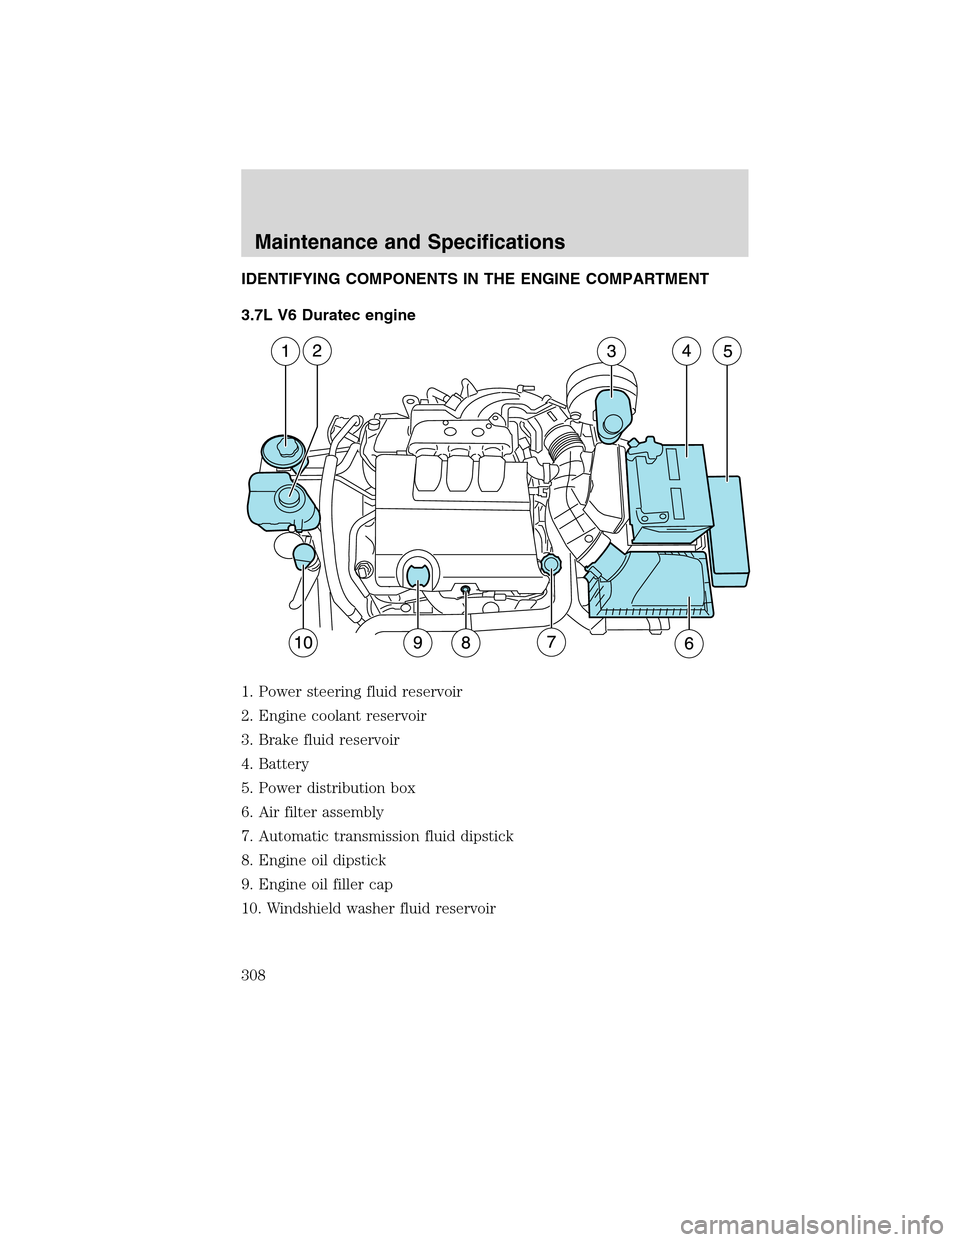 LINCOLN MKS 2010 Service Manual IDENTIFYING COMPONENTS IN THE ENGINE COMPARTMENT
3.7L V6 Duratec engine
1. Power steering fluid reservoir
2. Engine coolant reservoir
3. Brake fluid reservoir
4. Battery
5. Power distribution box
6. A